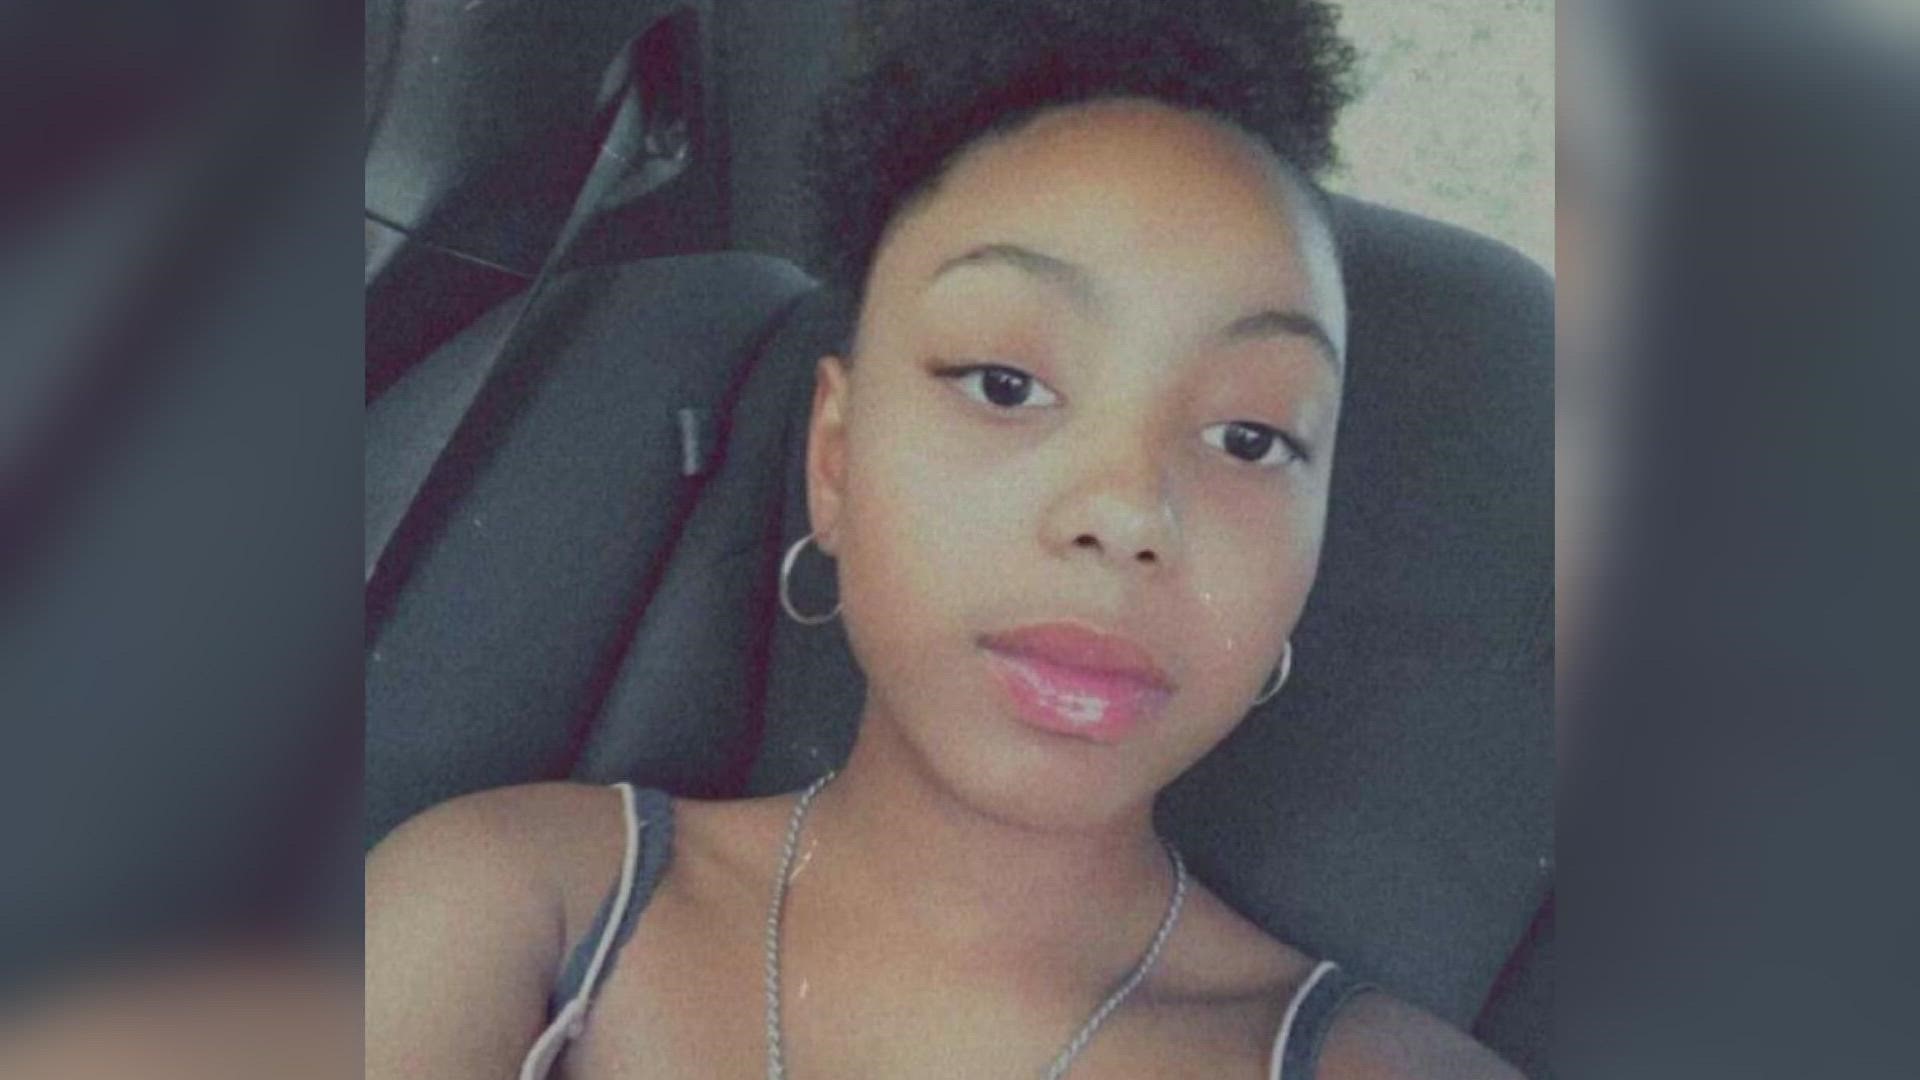 A 16-year-old from Carmichael went missing after the night of Dec. 27, and the severe storms have her family worried for her safety.